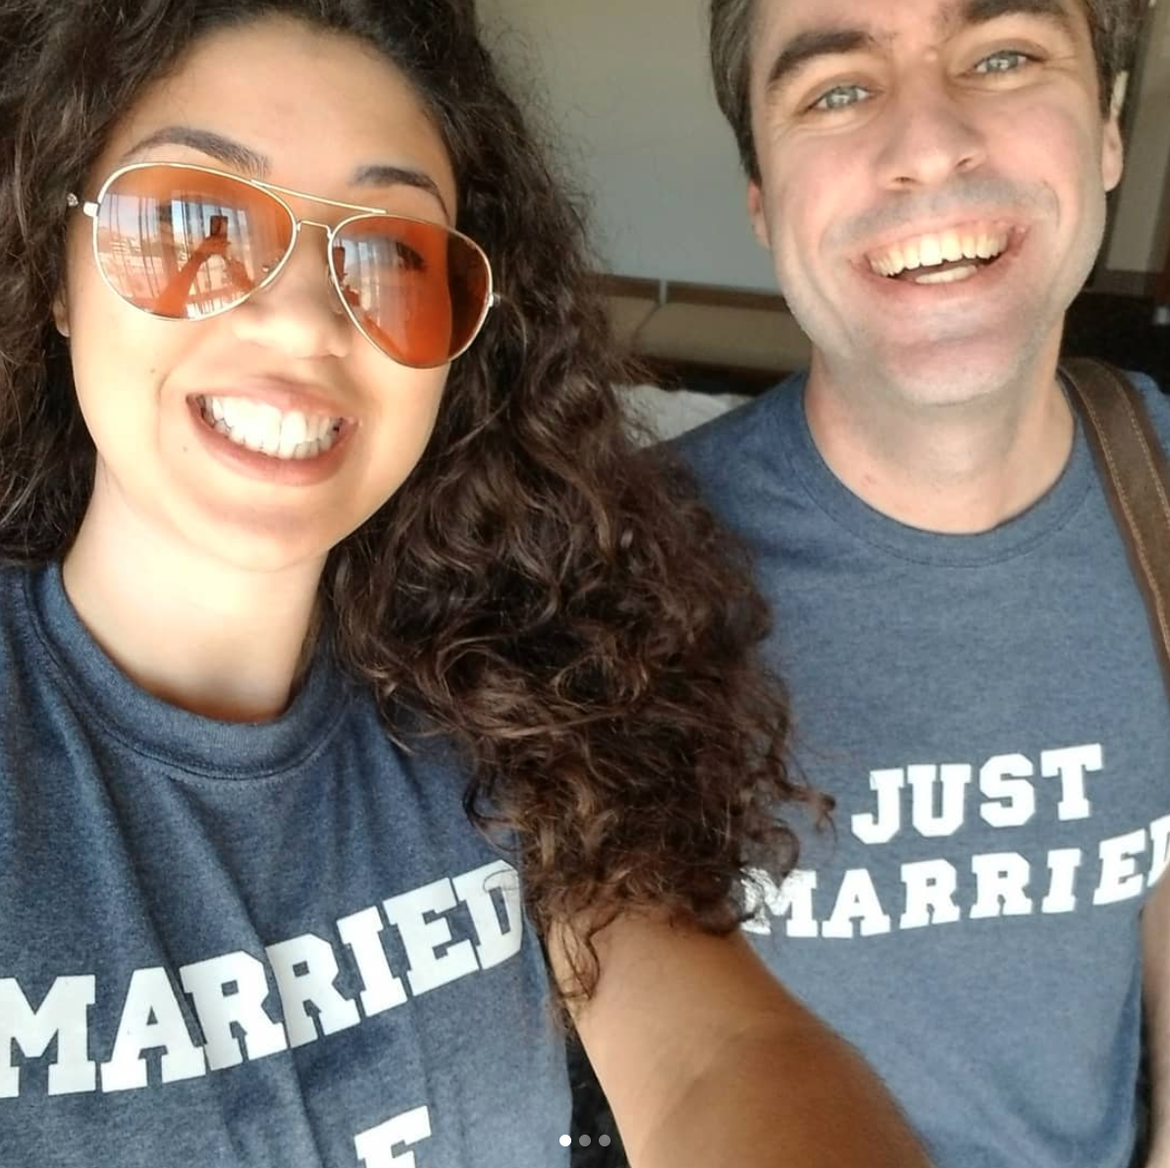 Geoff and his new wife on their honeymoon